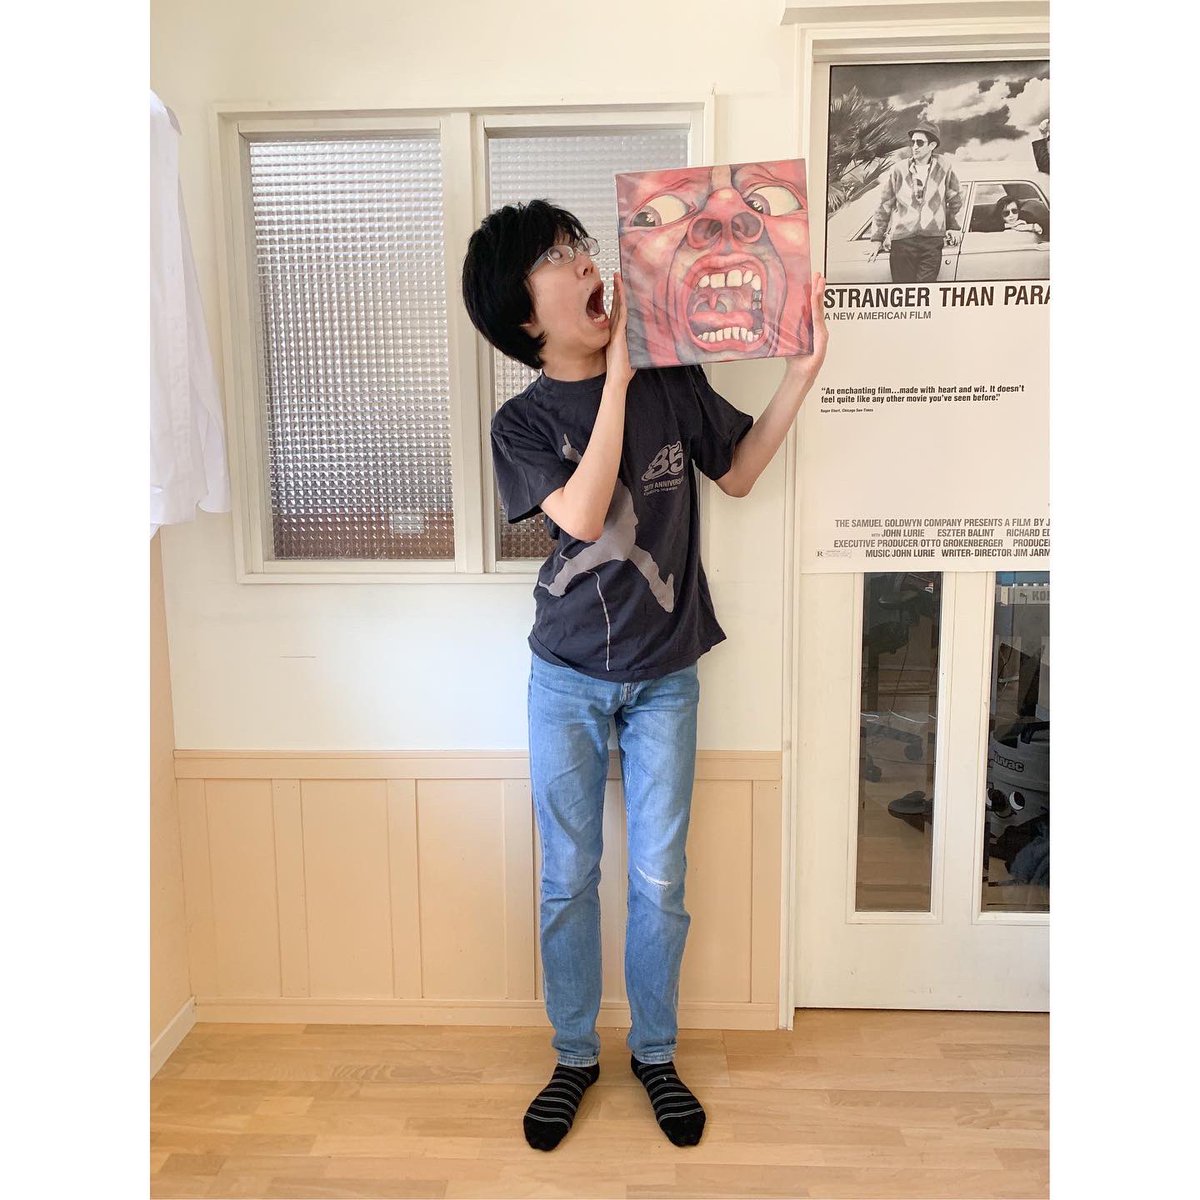 ♛♛♛
Today I went to the record store again!
I finally bought In the Court of the Crimson King!
♛♛♛
#sohappymusic 
#so
#想
#13yearsold 
#プログレッシブロック 
#レコードのある生活
#inthecourtofthecrimsonking